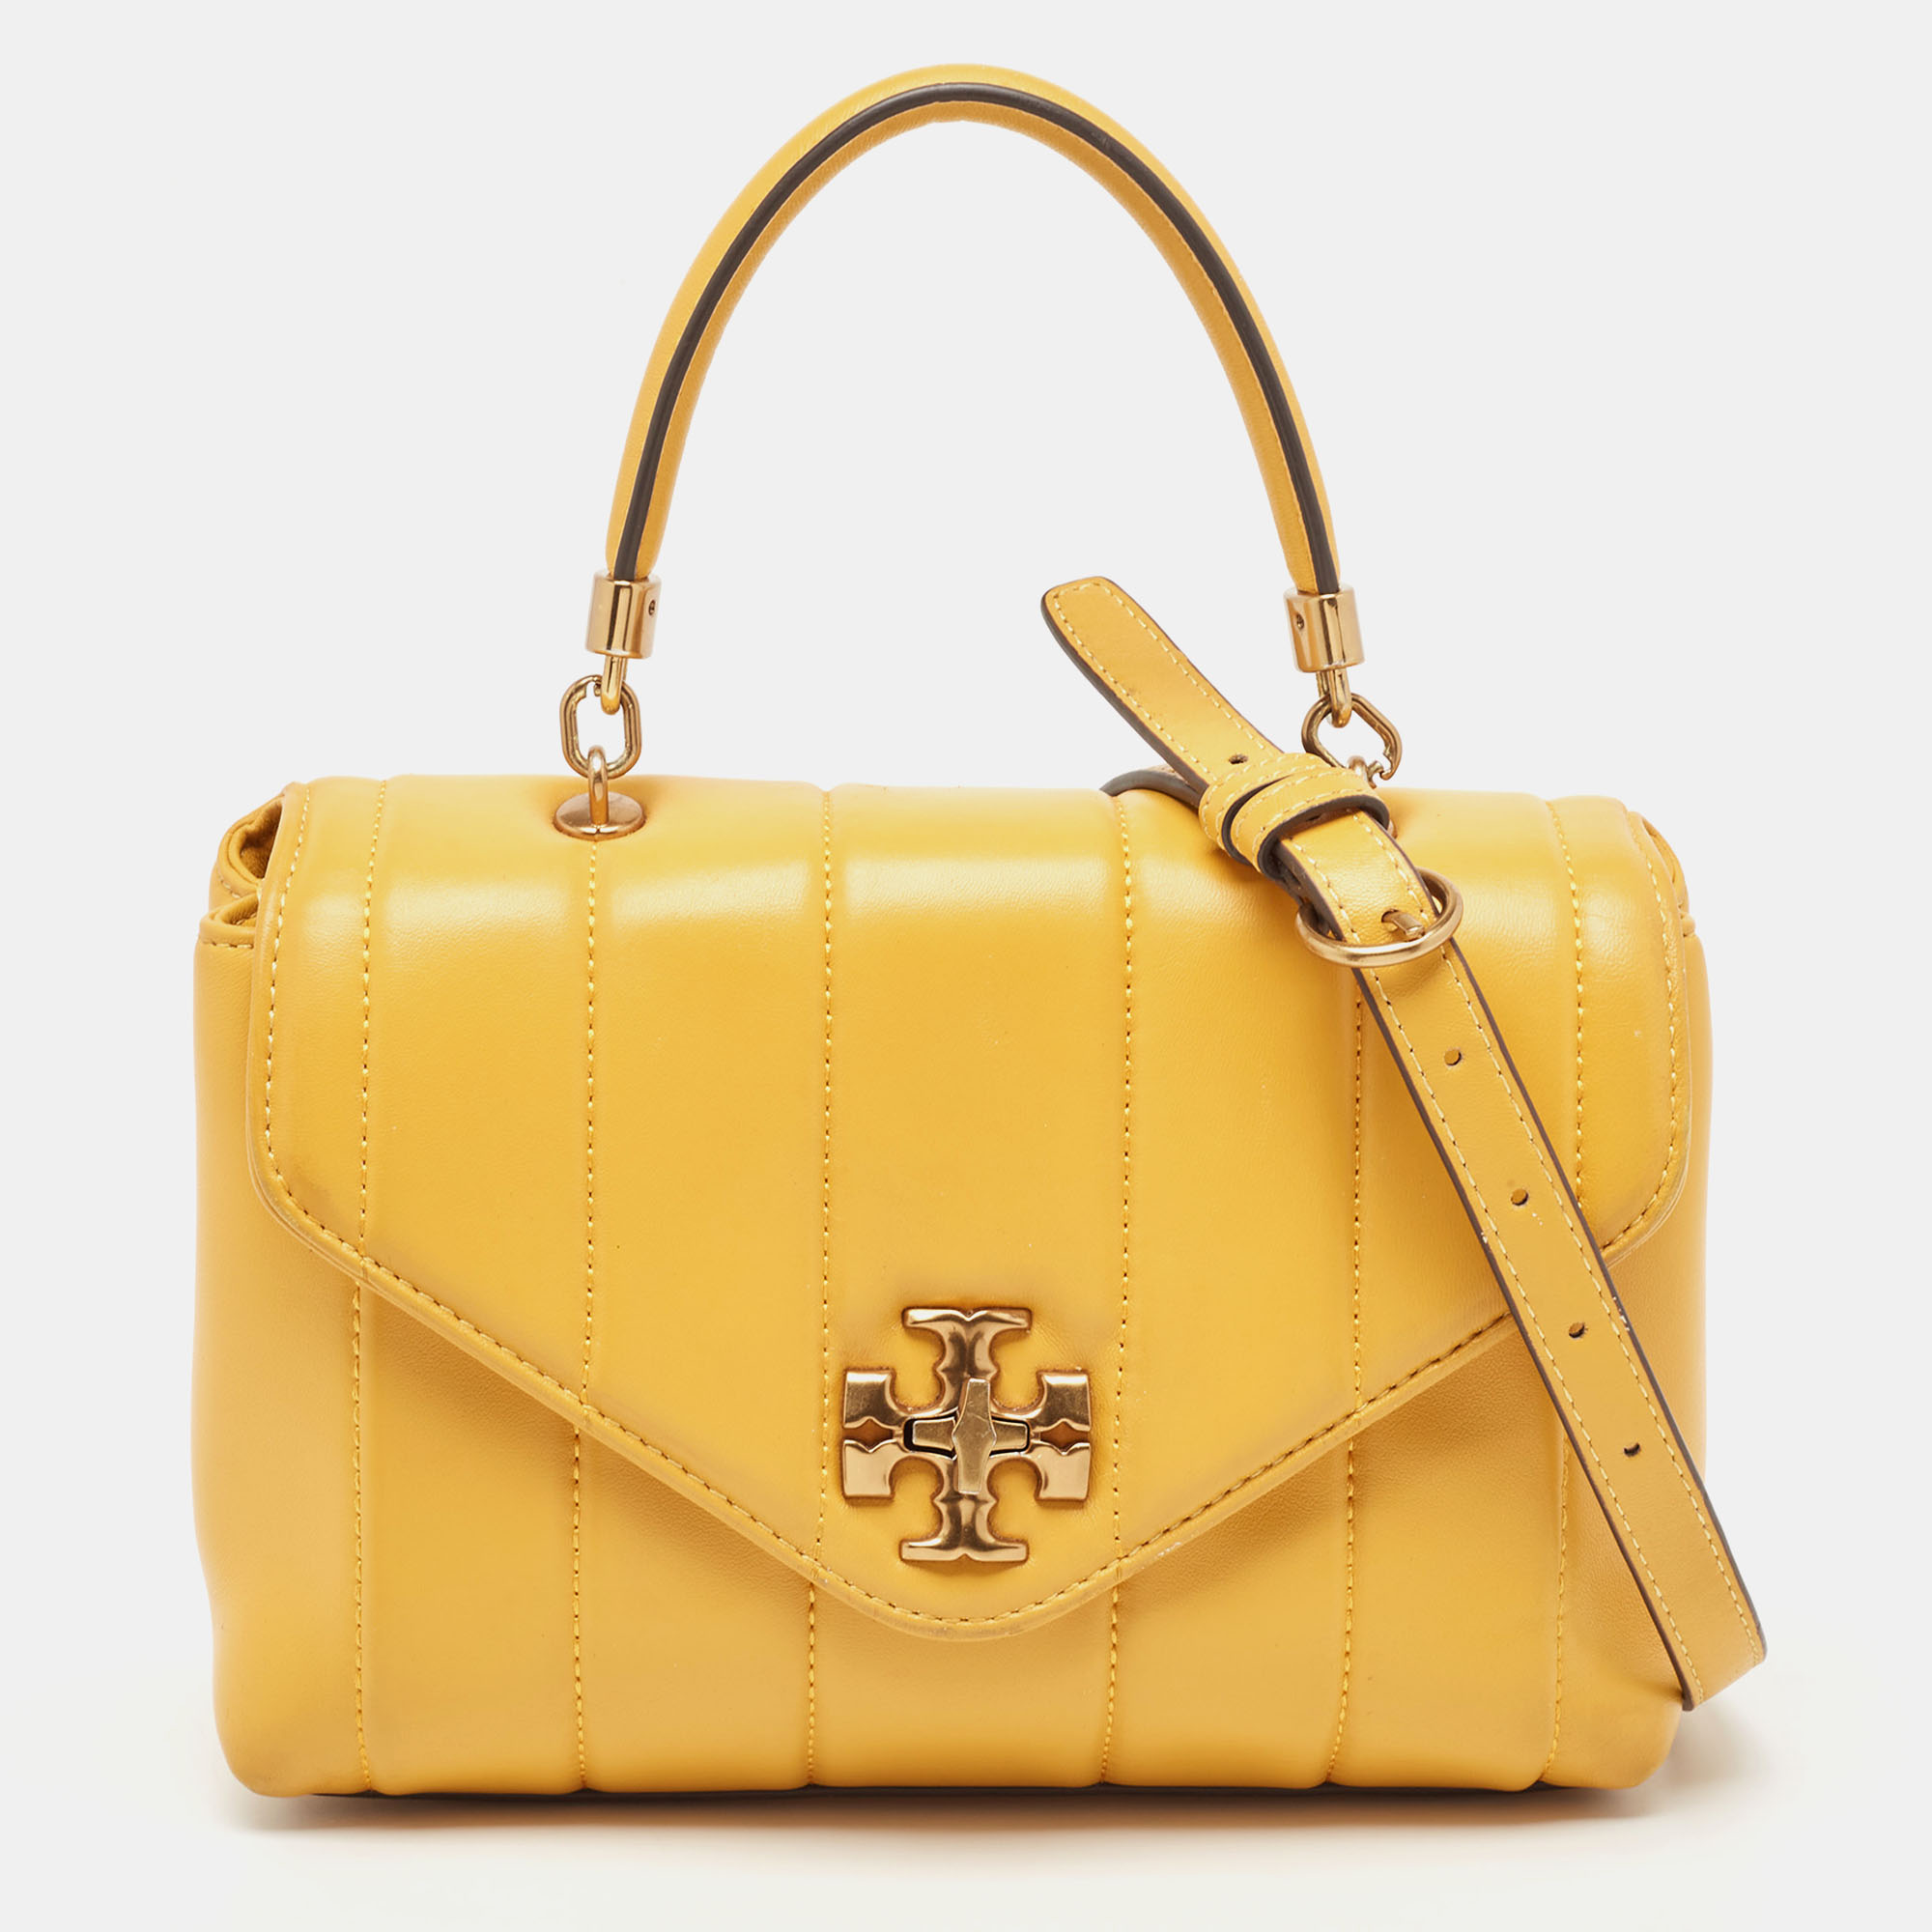 Tory burch yellow quilted leather kira top handle bag